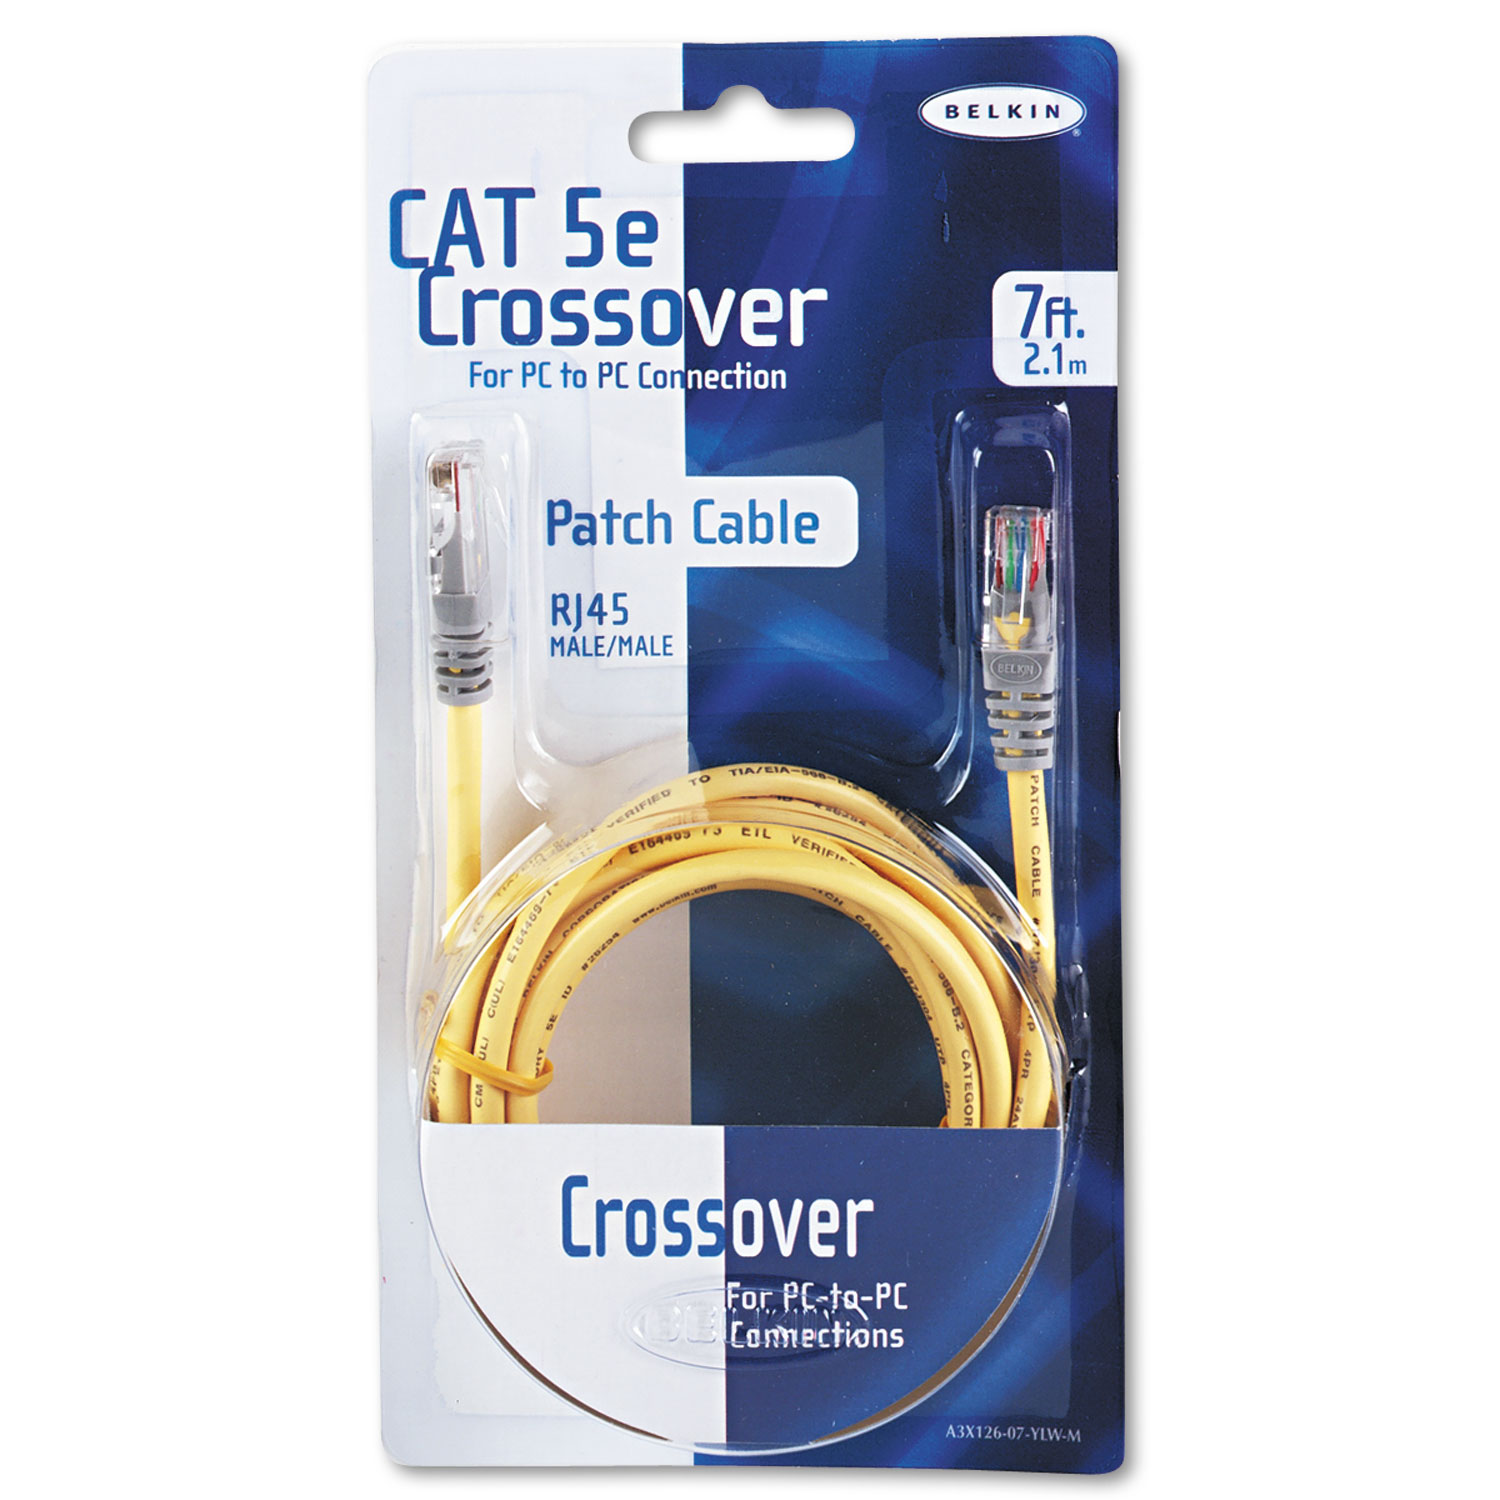 CAT5e Crossover Patch Cable, RJ45 Connectors, 7 ft., Yellow